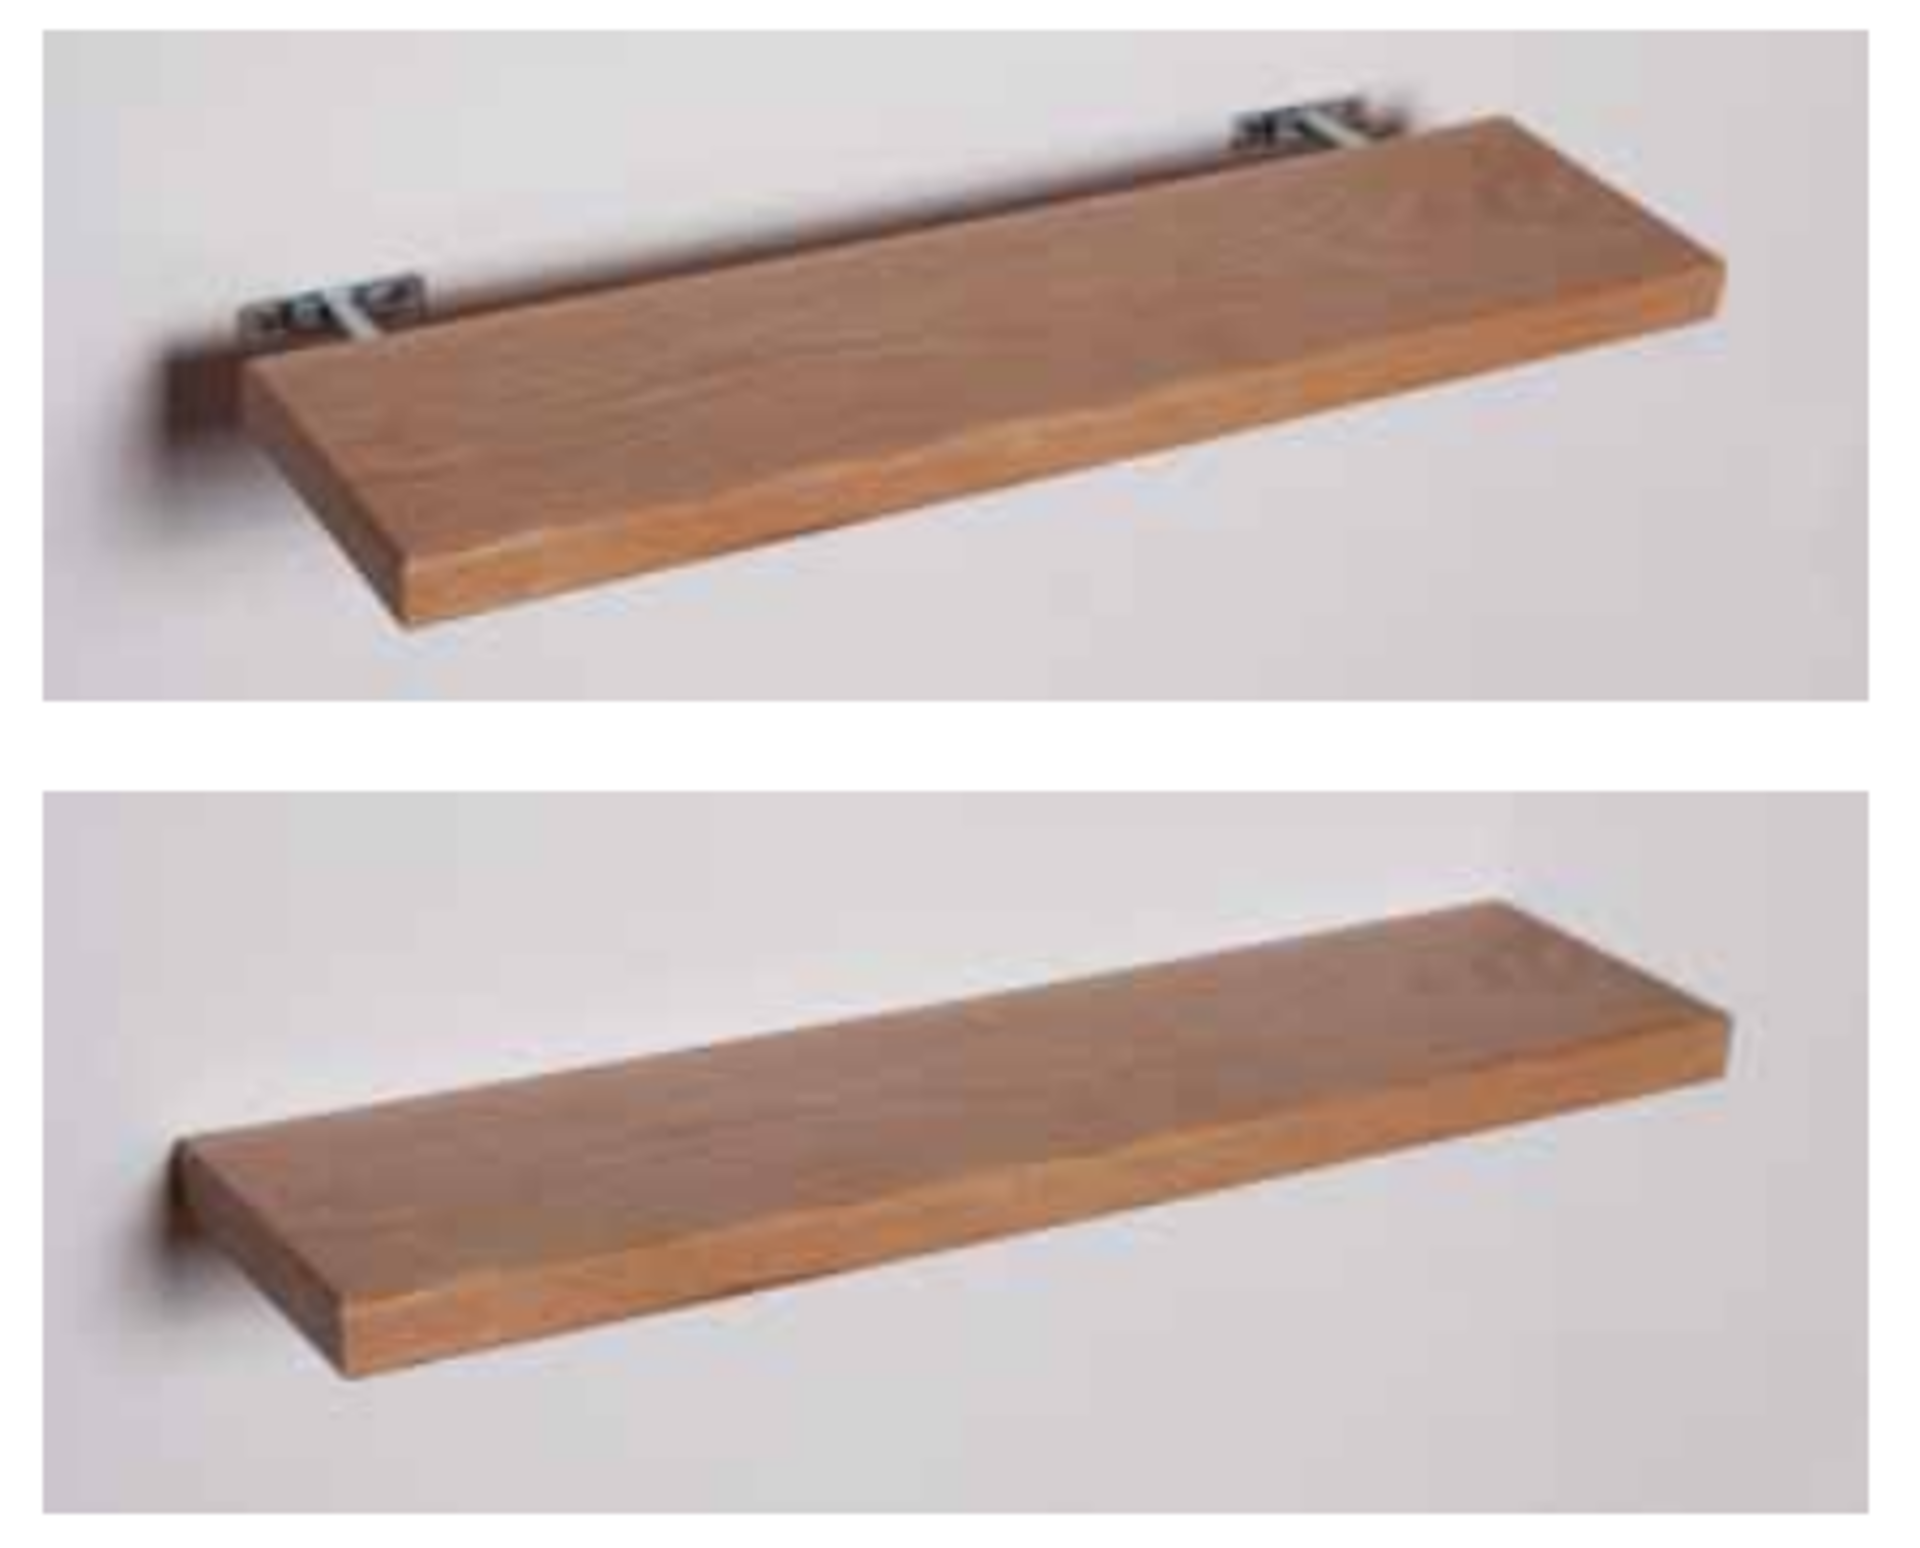 1 x Stonearth Large Bathroom Storage Shelf With Concealed Brackets - American Solid WALNUT - Image 2 of 12